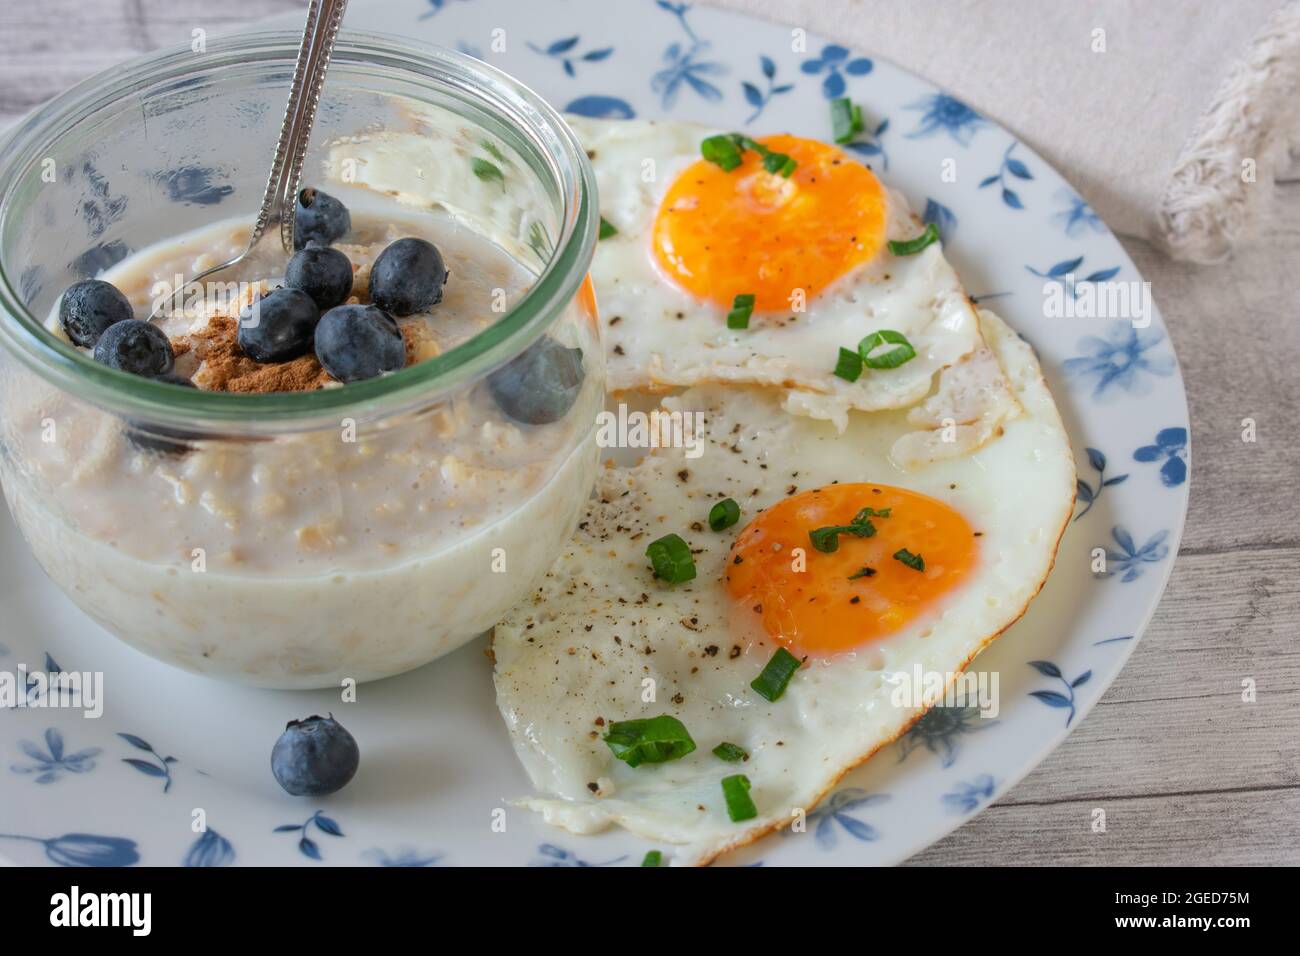 Homemade Breakfast with oats, blueberries and eggs on plate Stock Photo